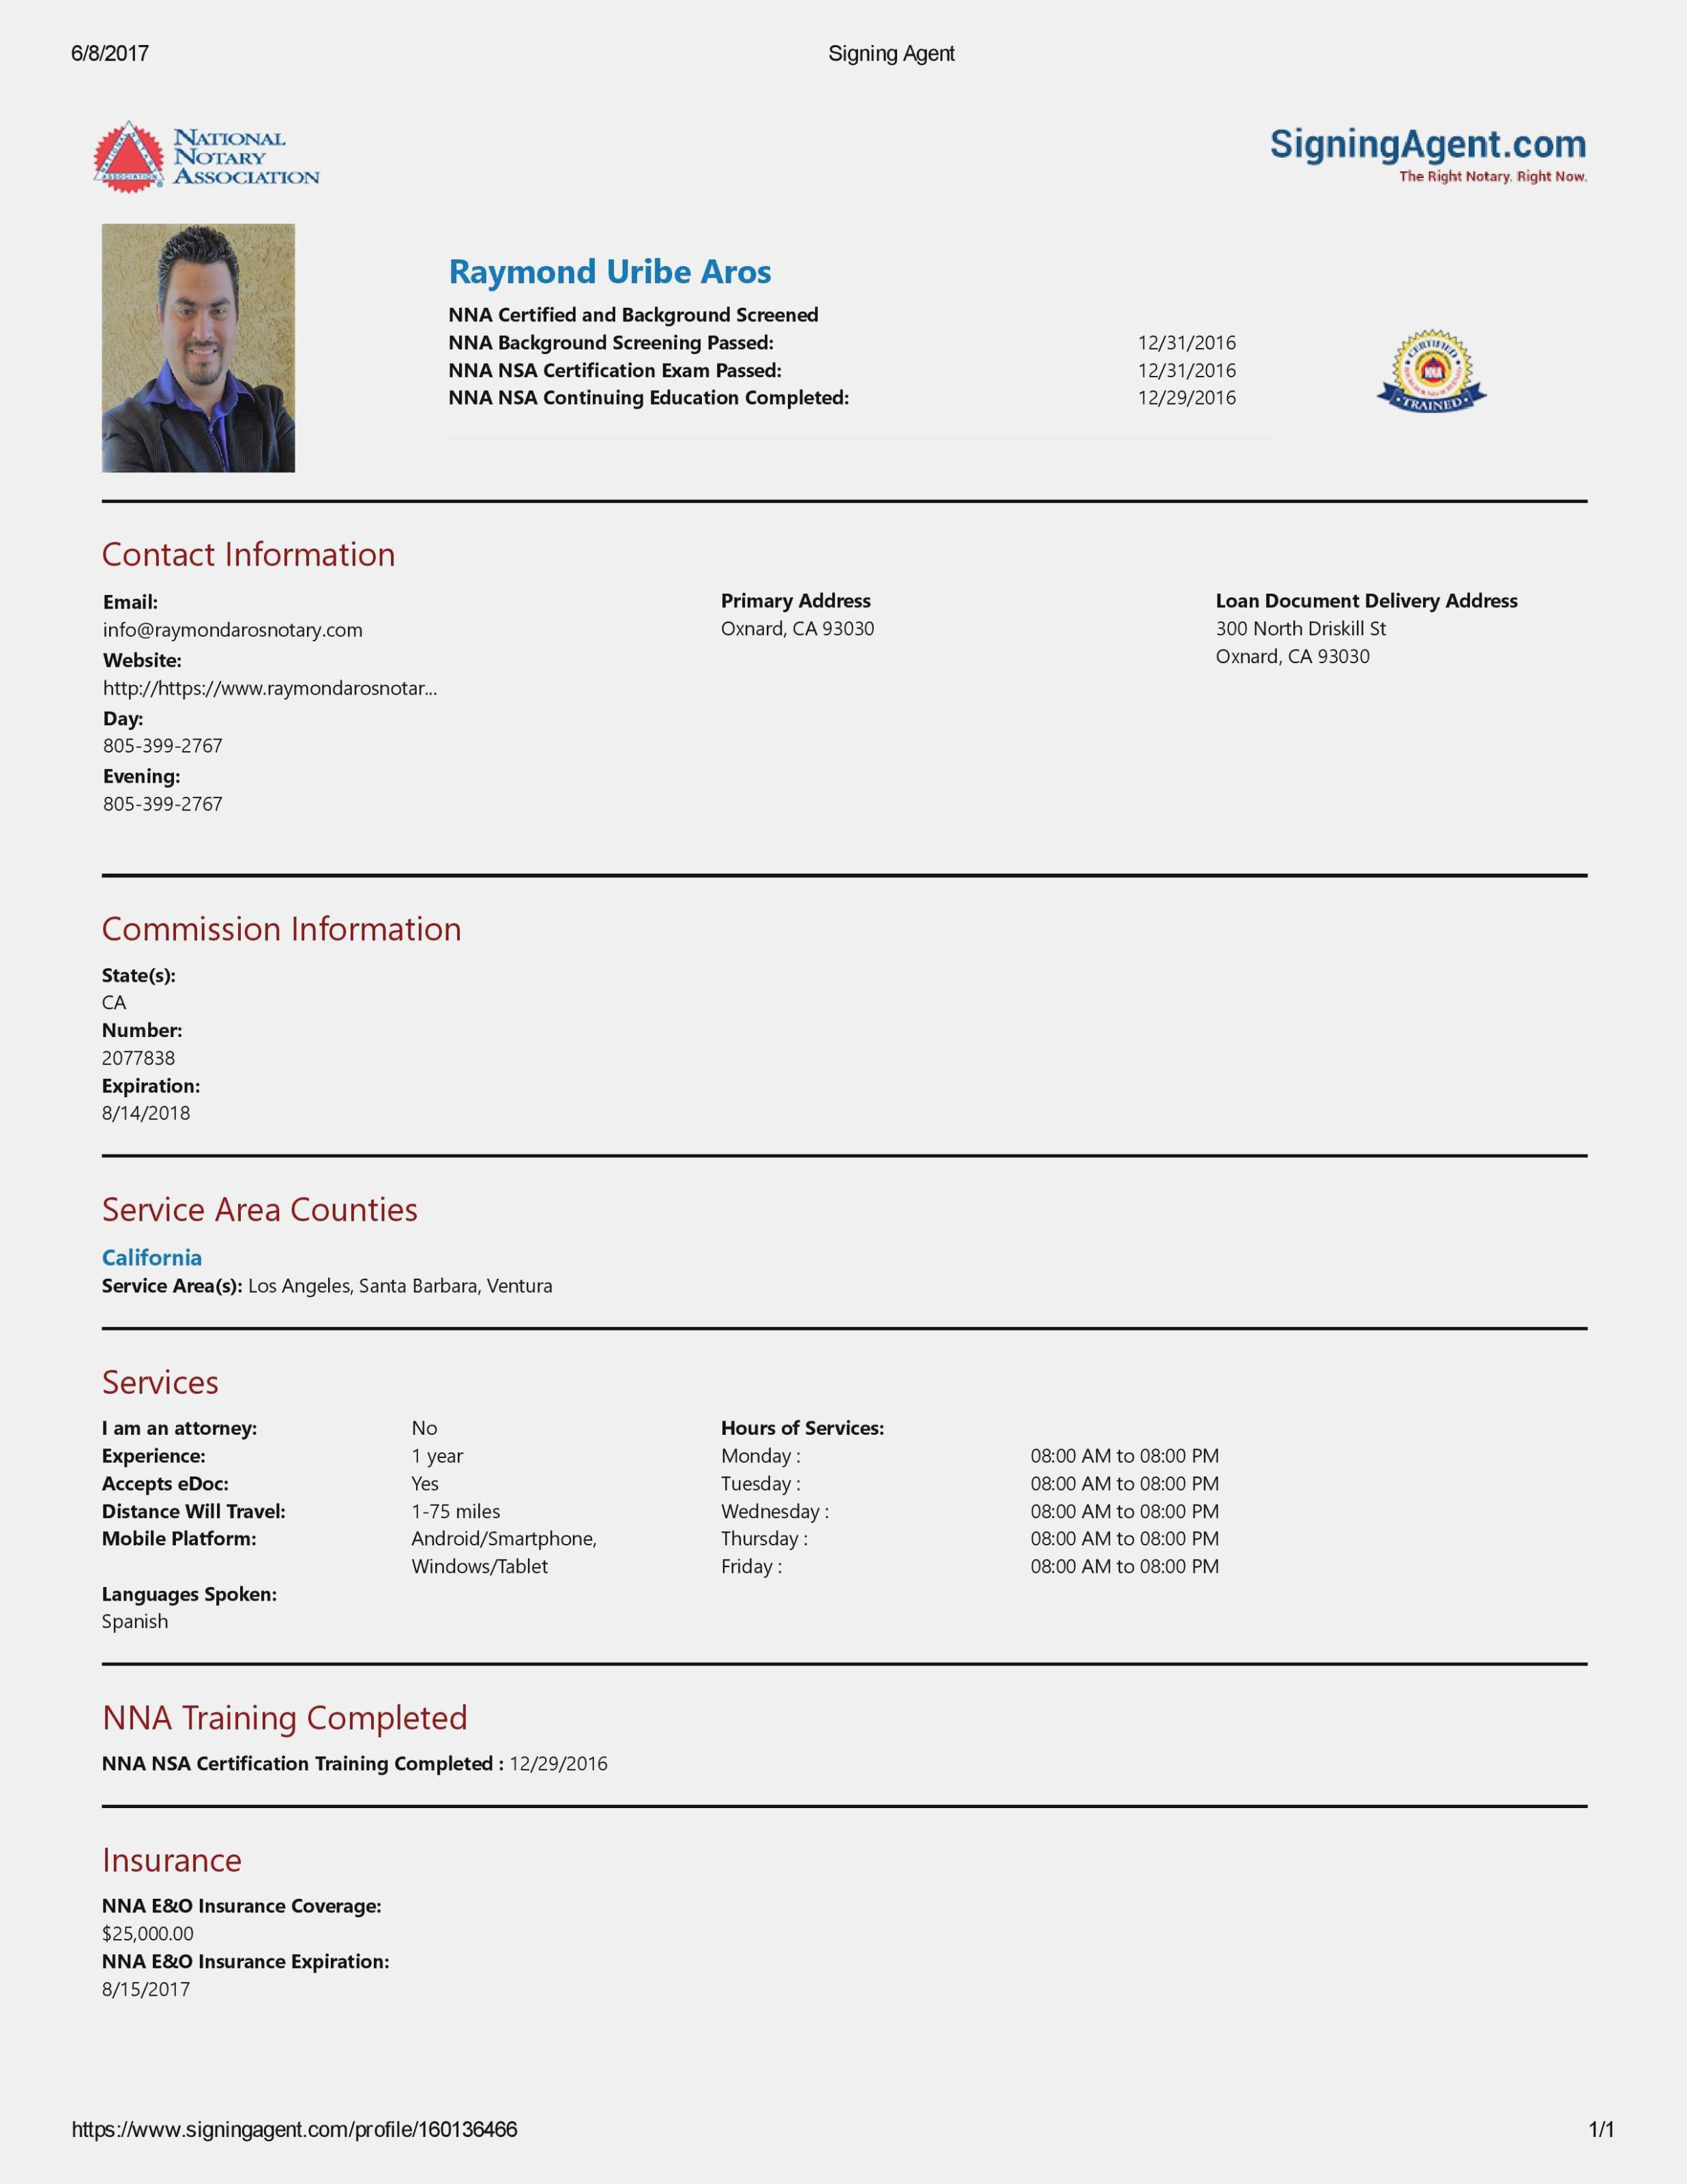 notary-invoice-template